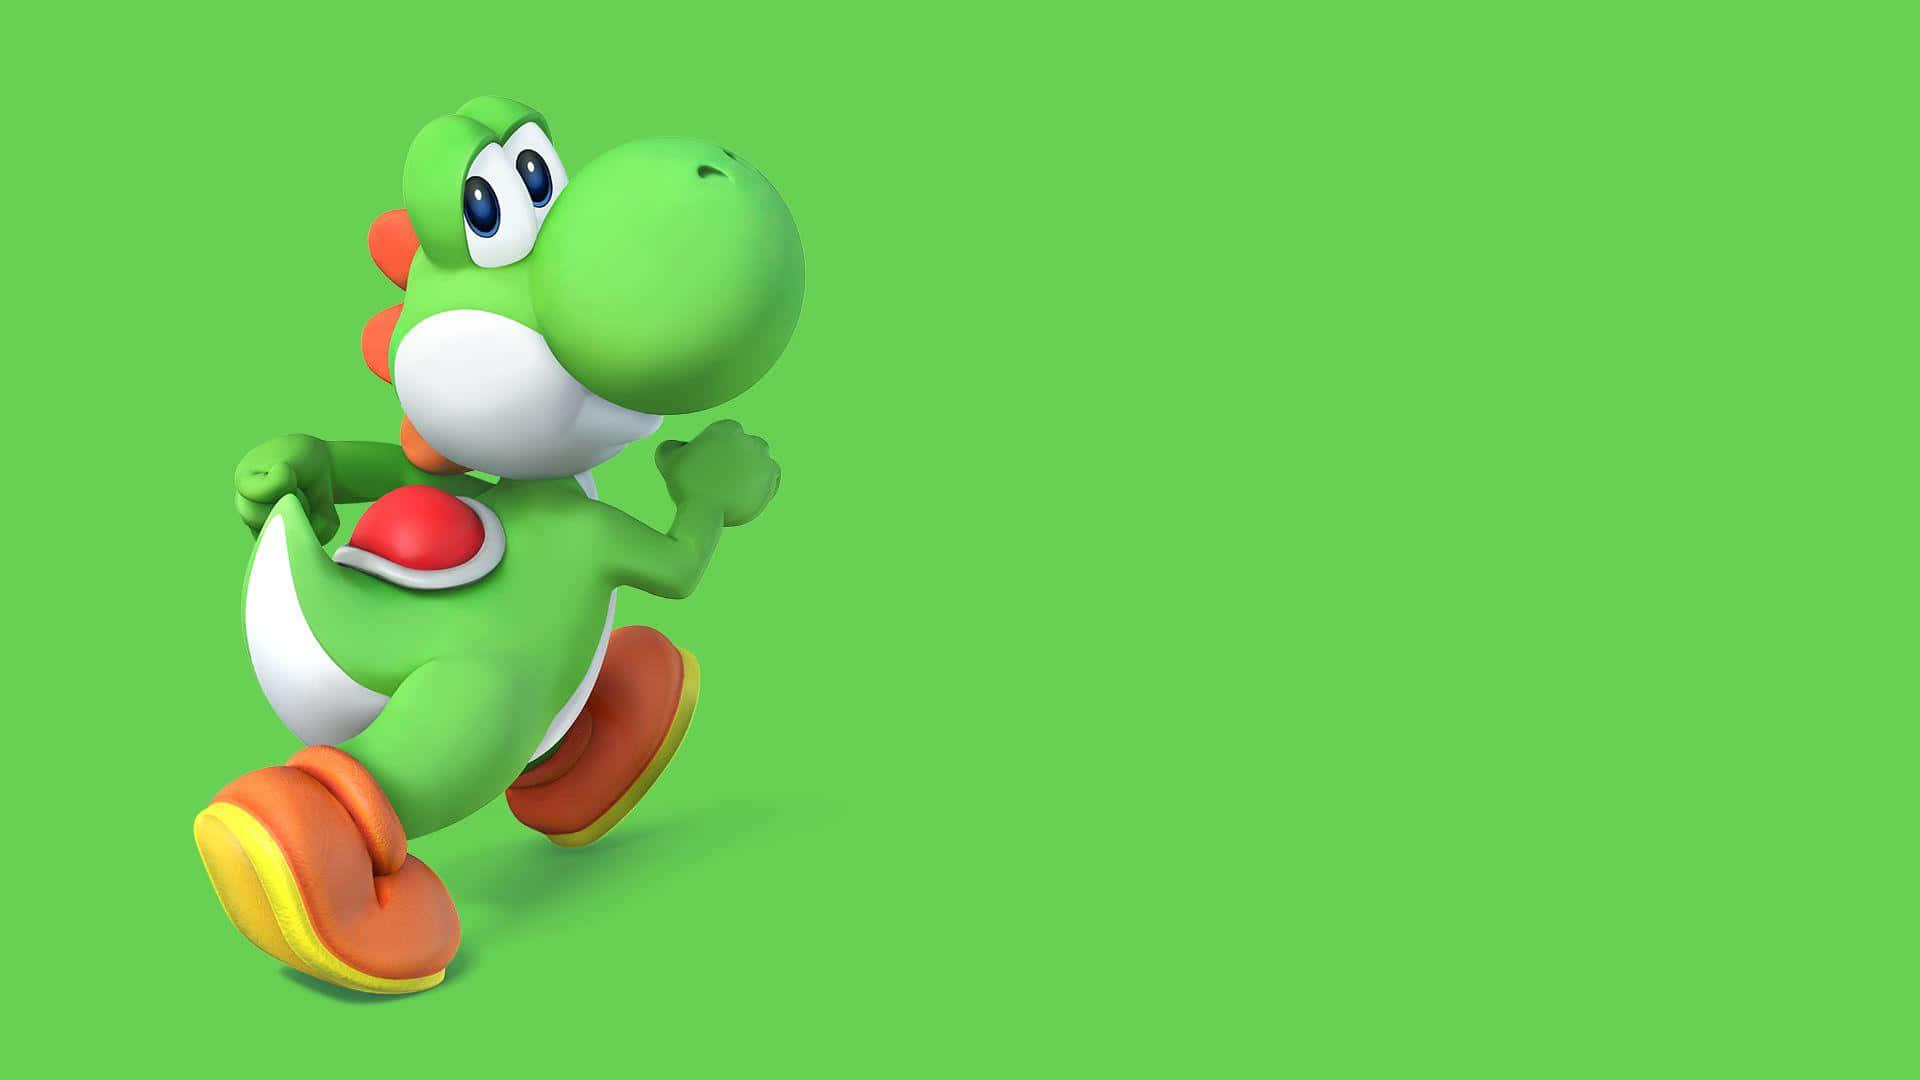 Explore Fantastic Lands With The All-powerful Yoshi Background